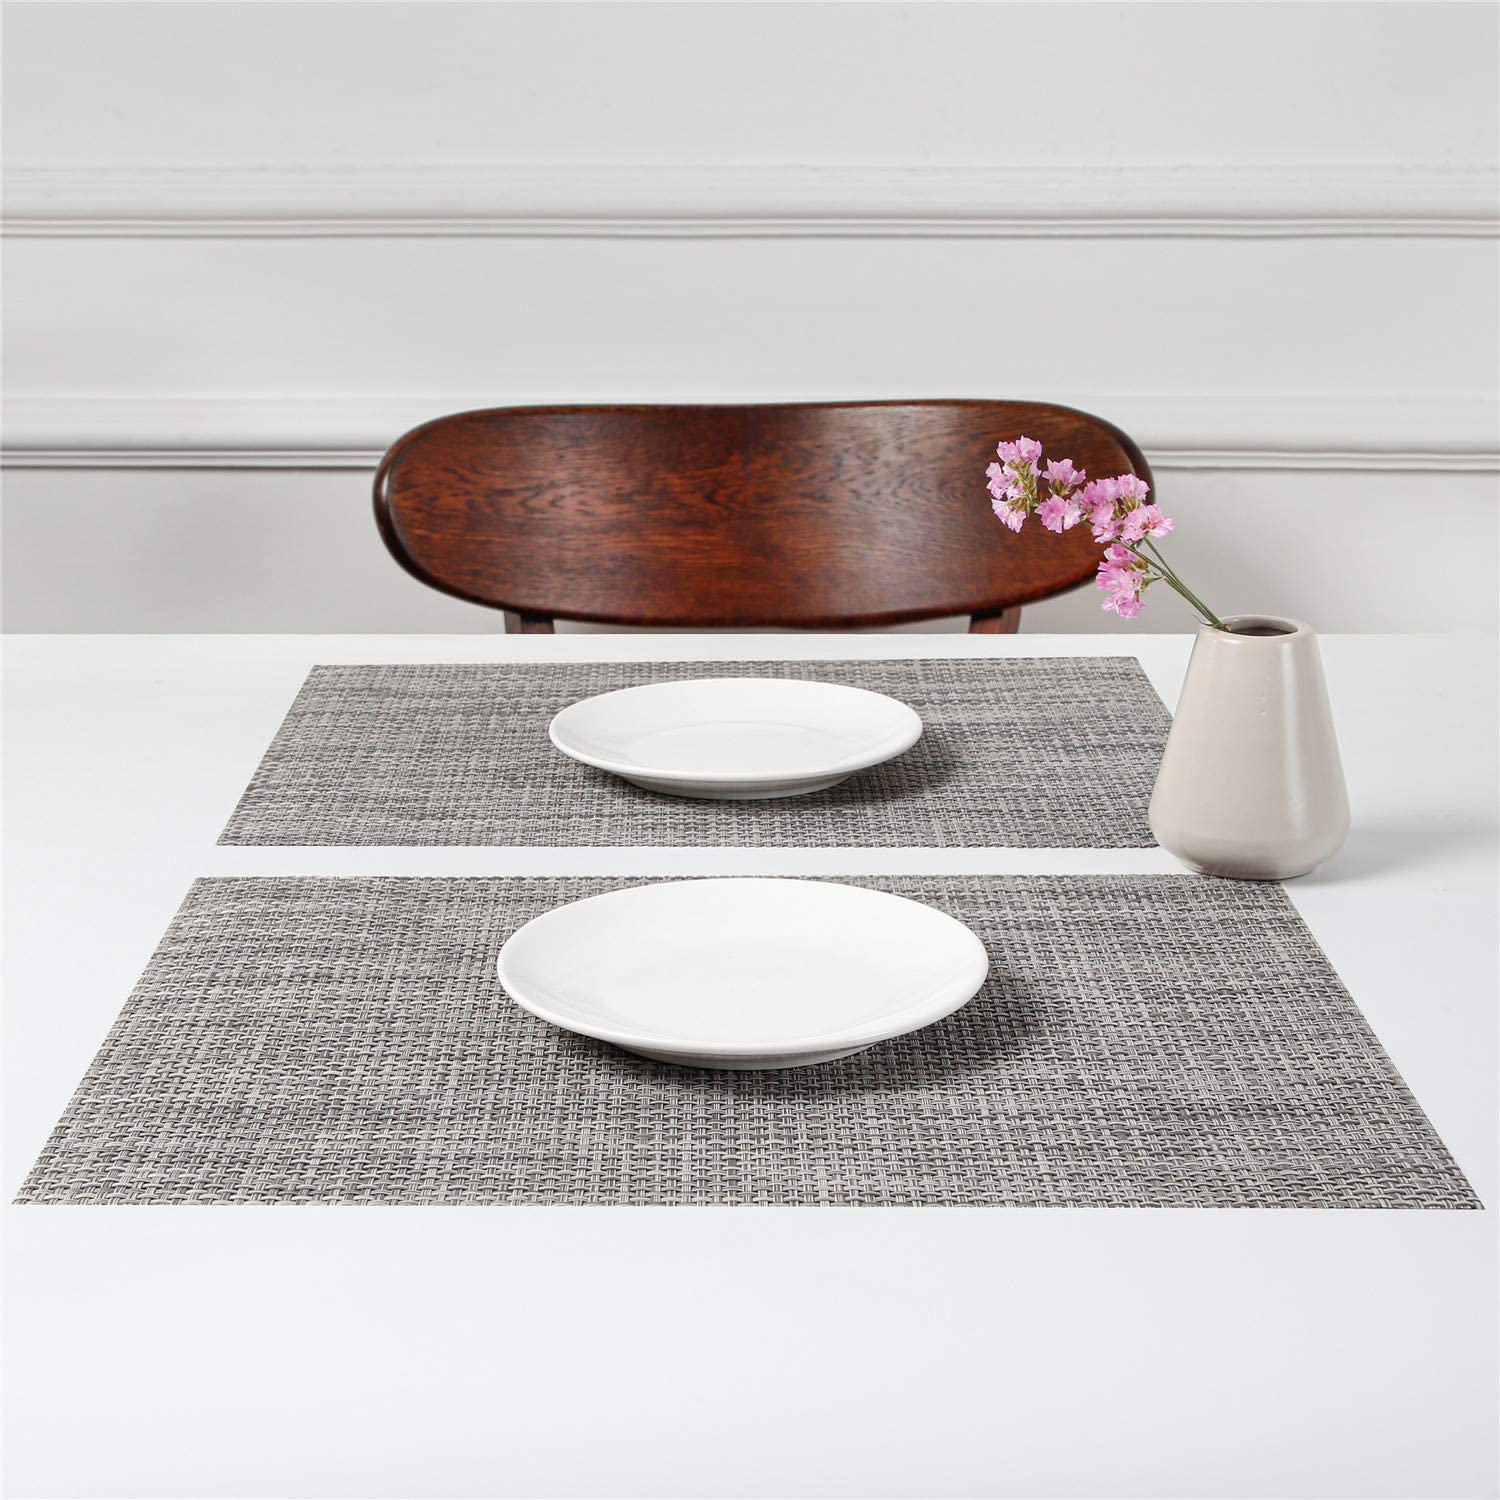 Vinyl Table Mats Set of 4, Heat Resistant Place Mats for Dining Table Washable Anti-Skid